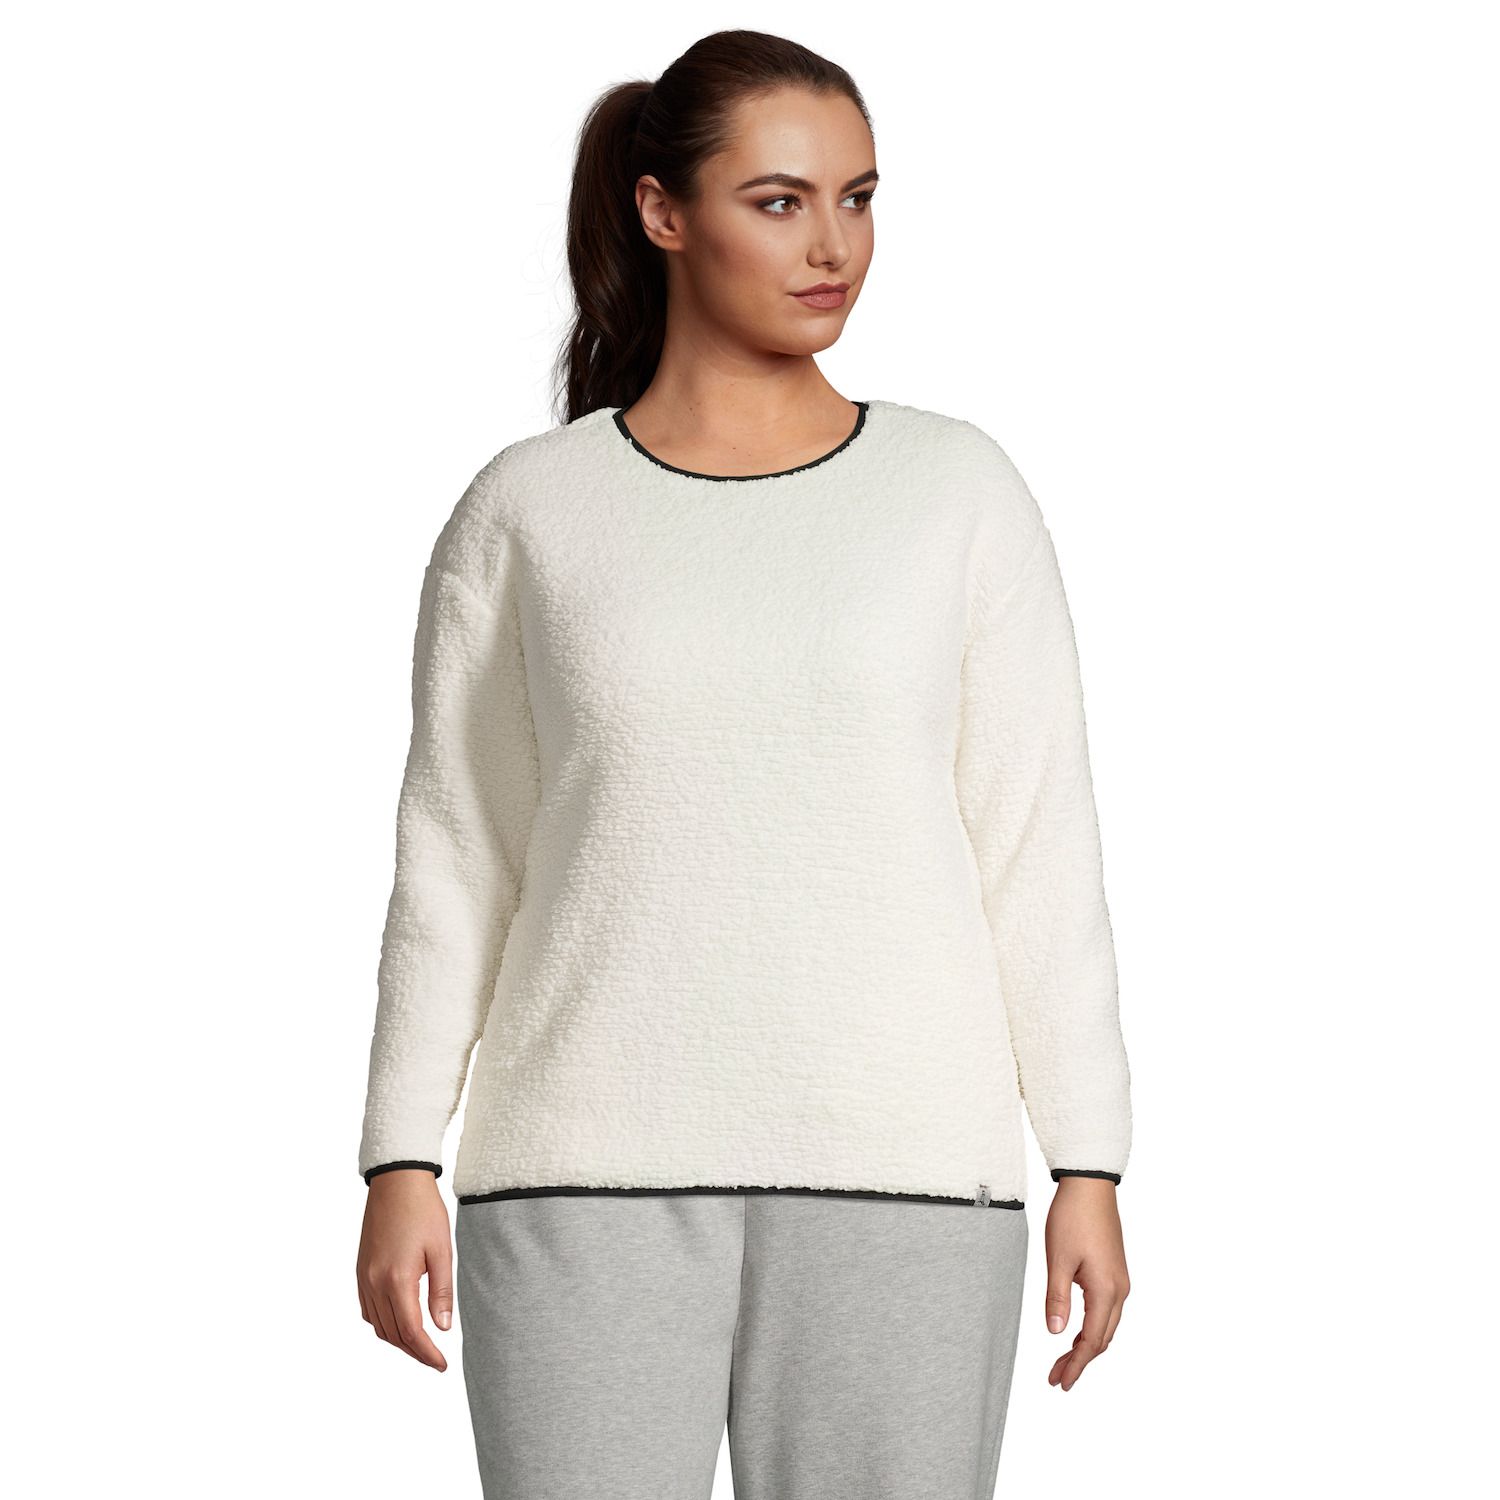 Image for Lands' End Plus Size Long Sleeve Sherpa Sweatshirt at Kohl's.